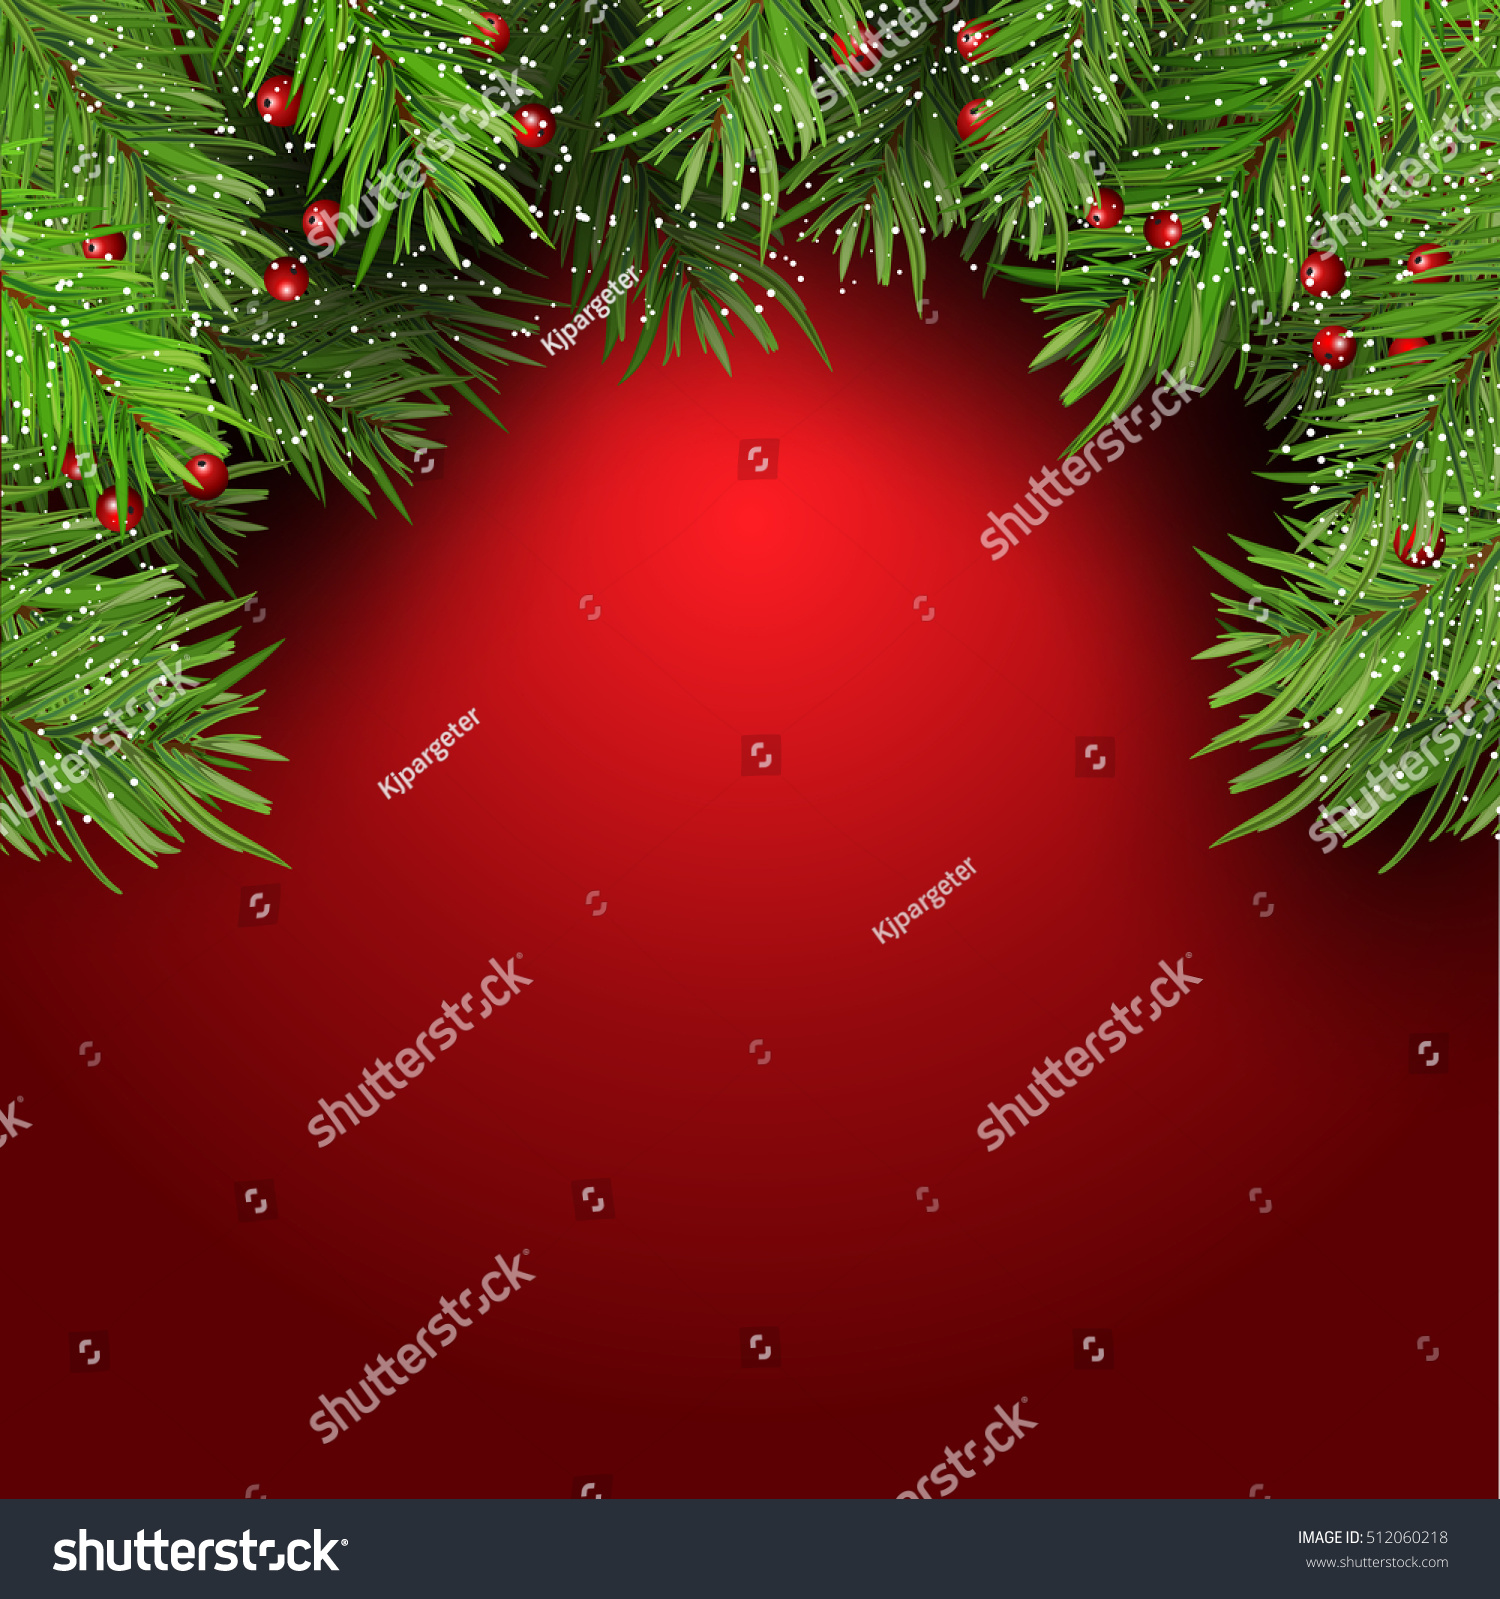 Christmas Background With Fir Tree Branches And Berries Stock Vector ...